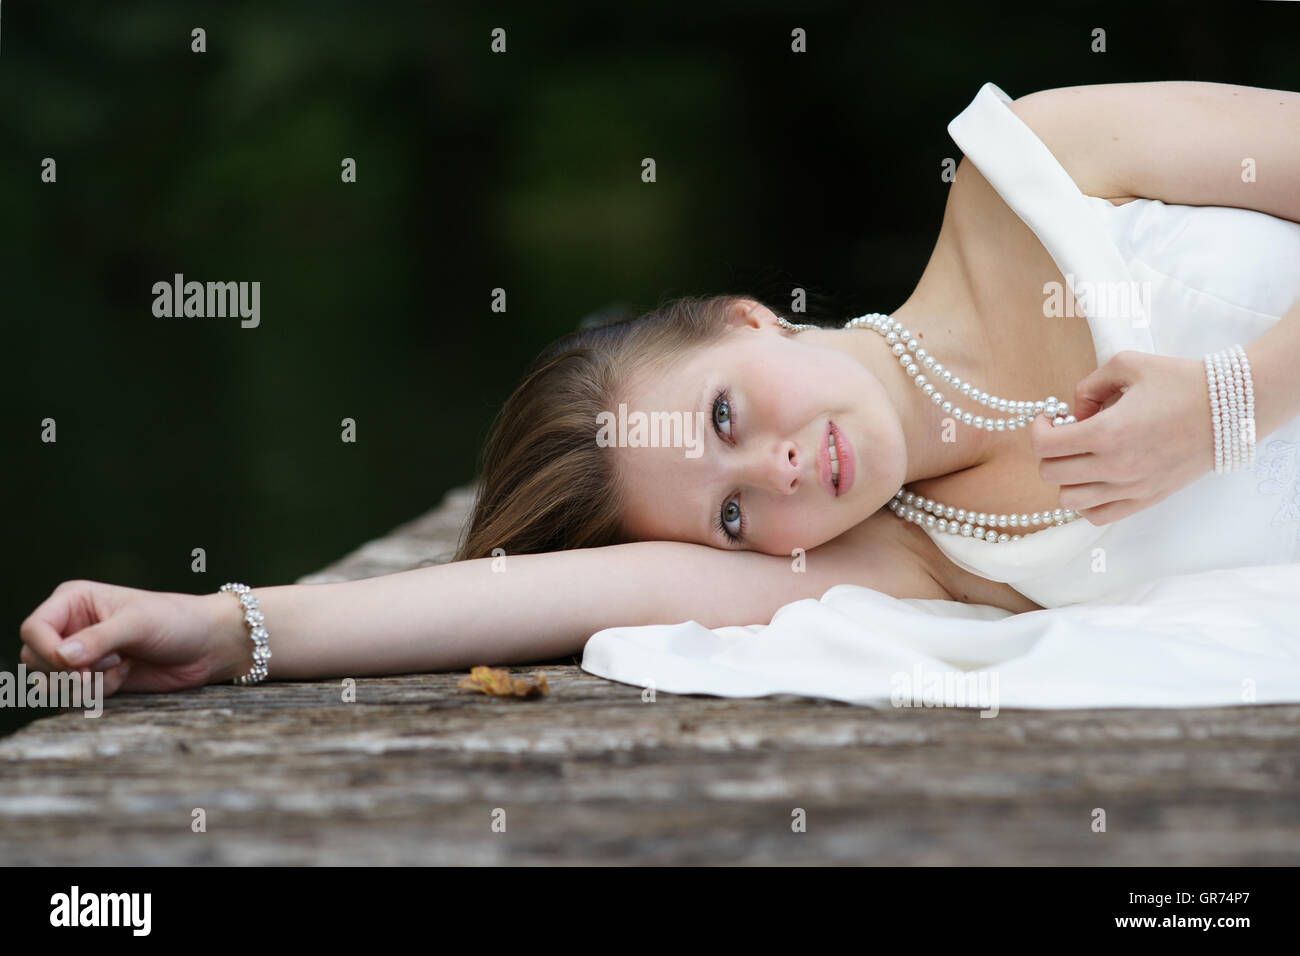 Girl With A White Dress Stock Photo